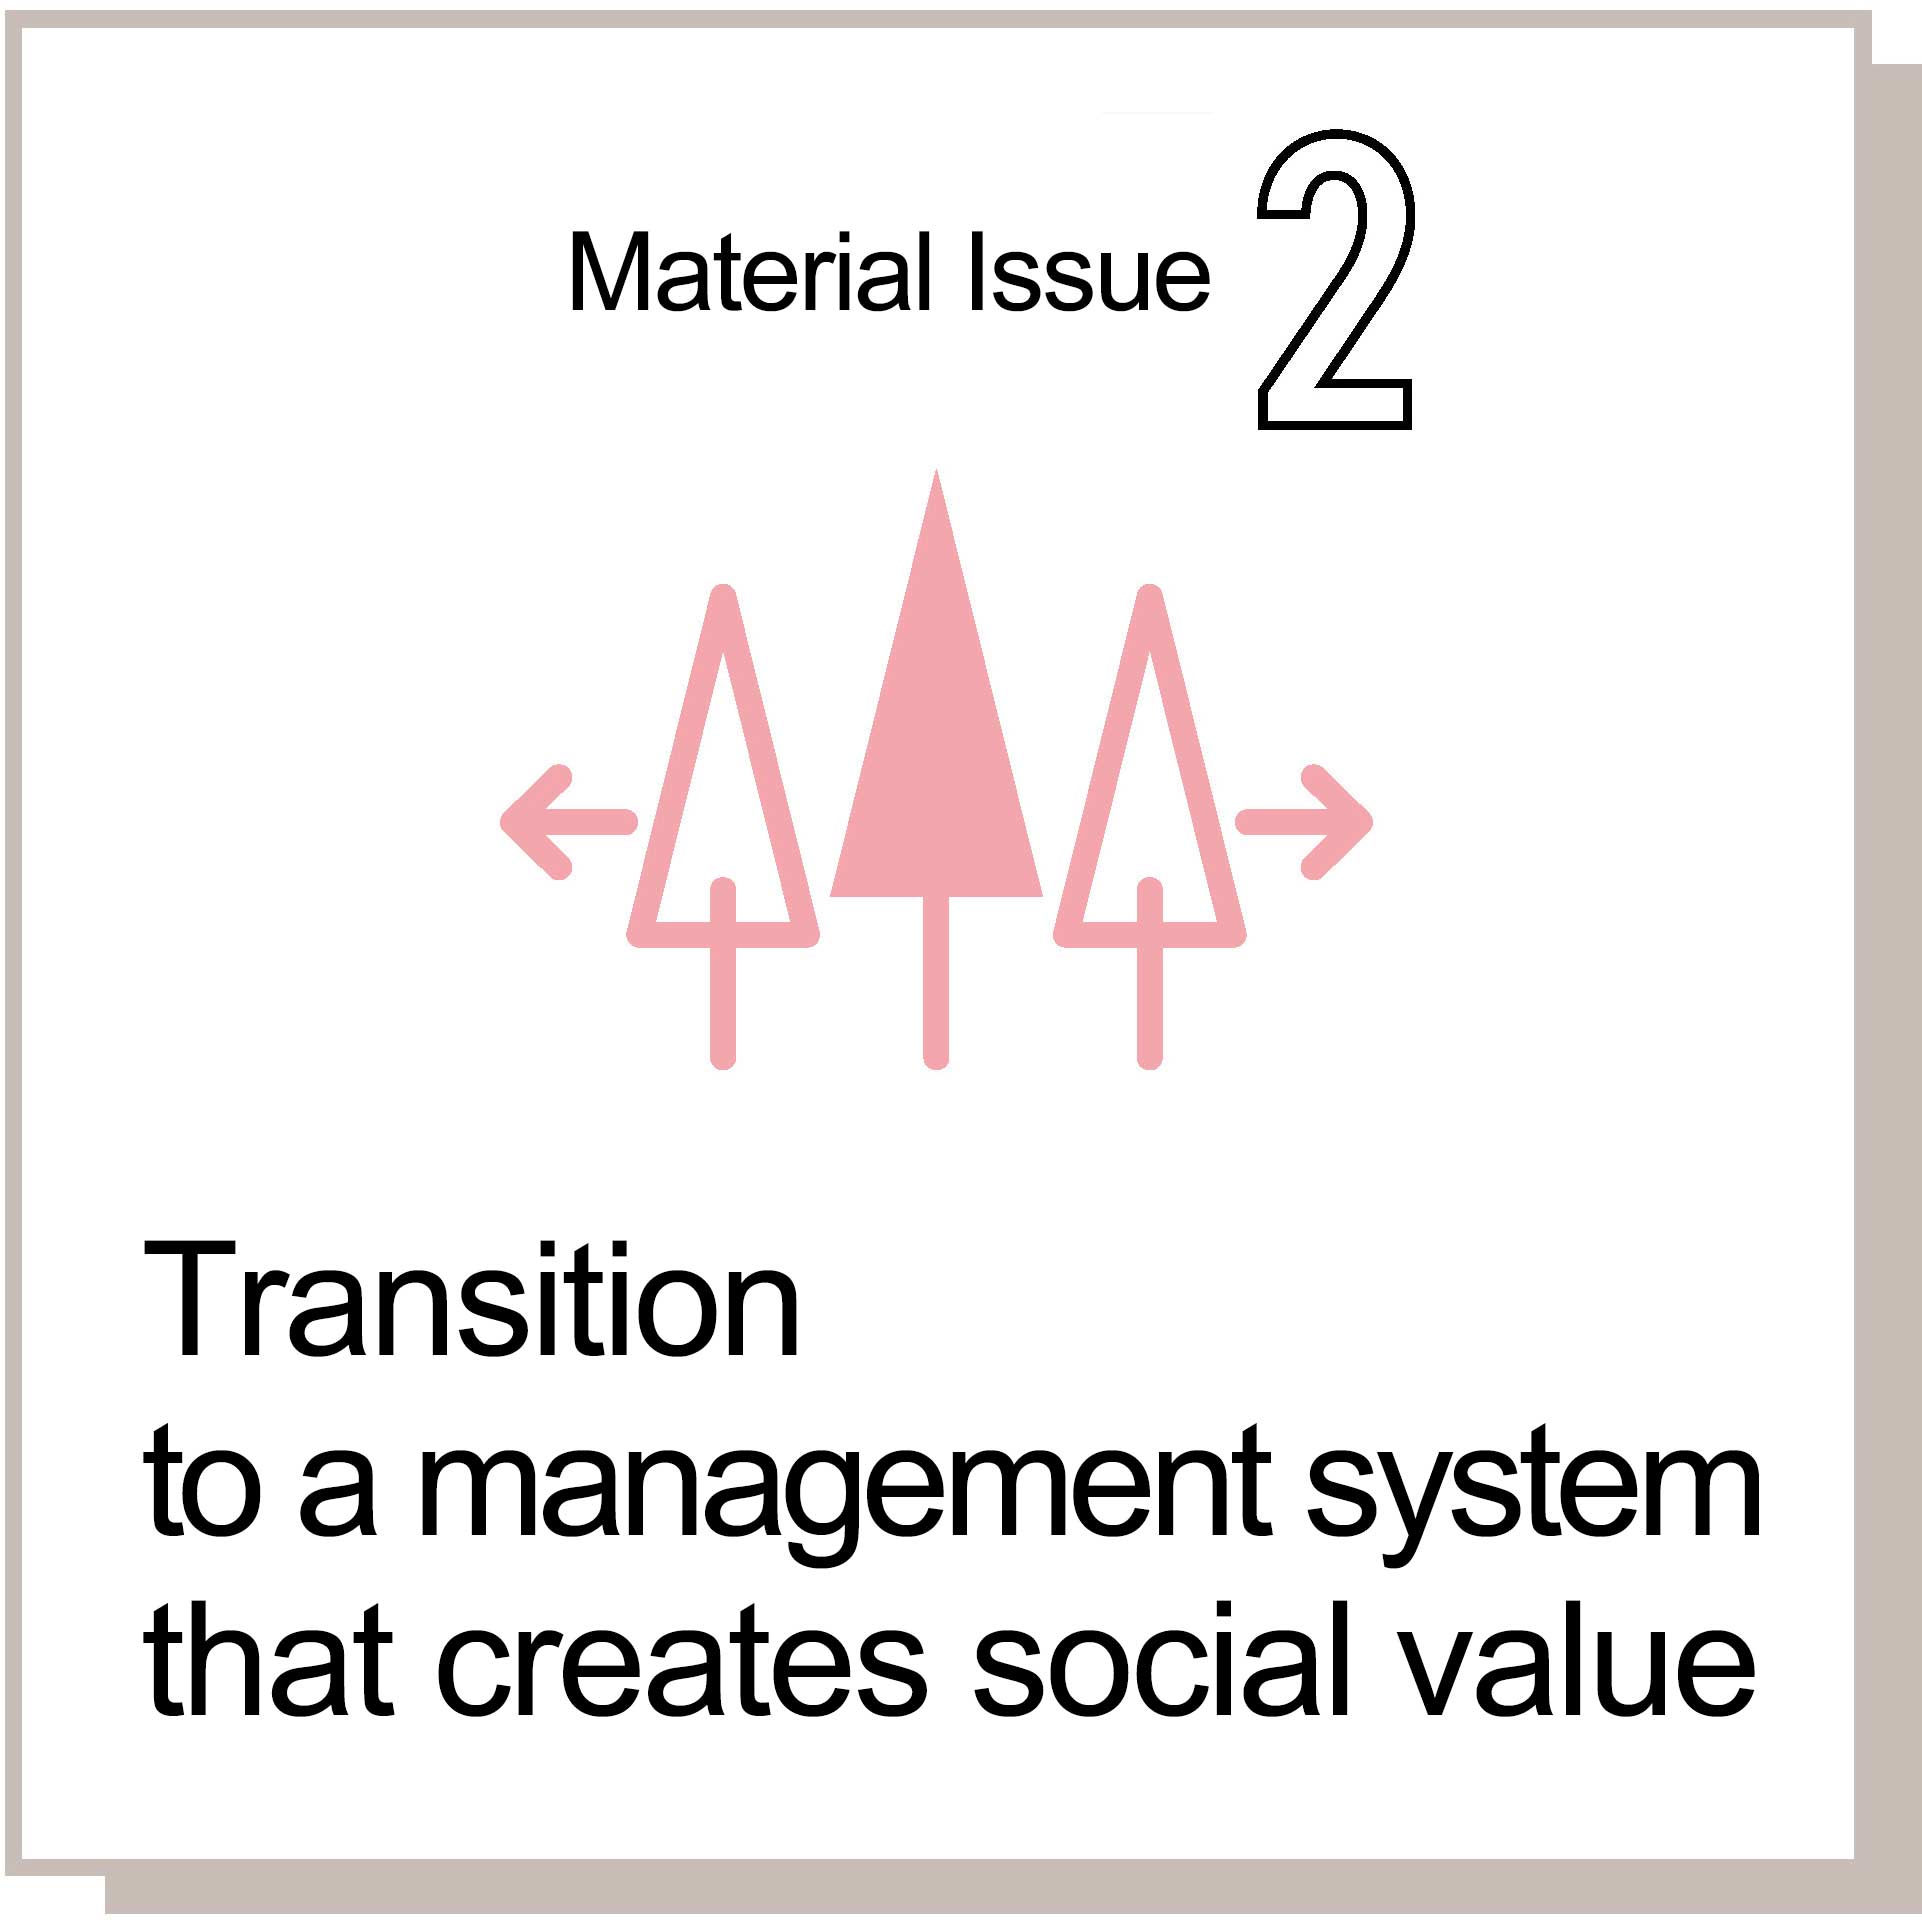 -Material issue 2- Transition to a Management System That Creates Social Value